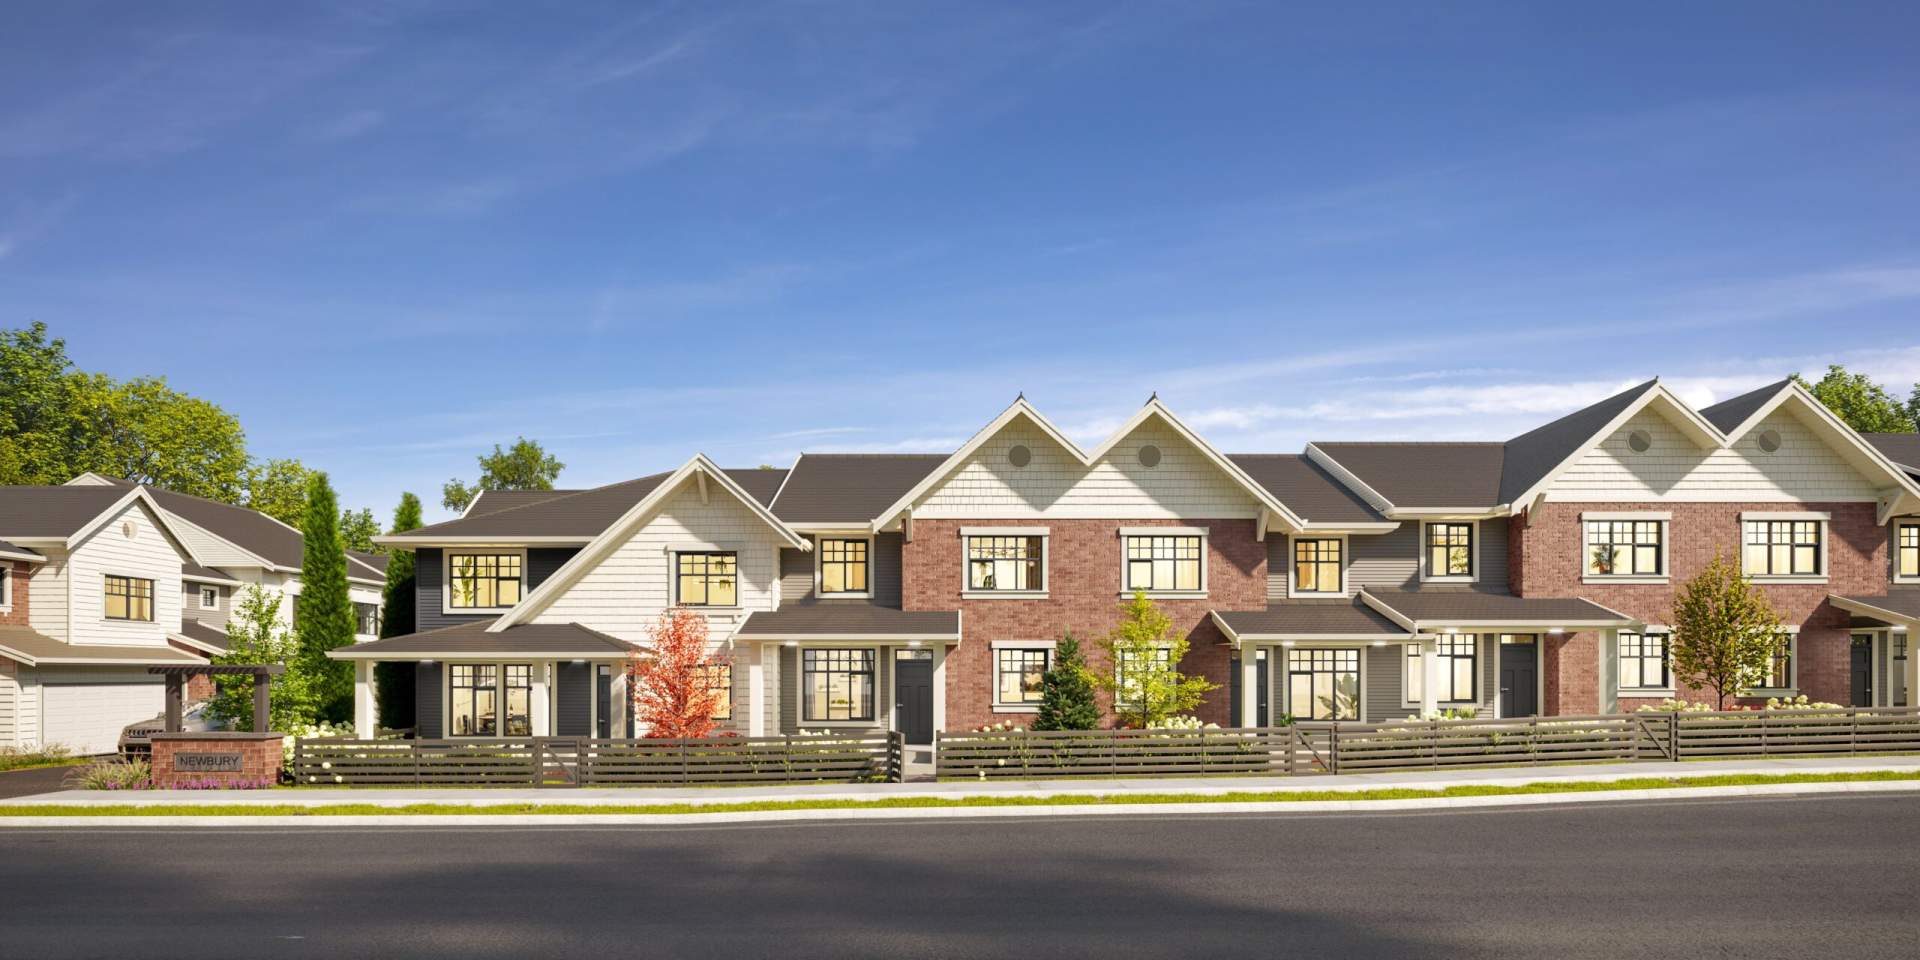 A new Latimer residential community of 84 three- and four-bedroom townhomes.